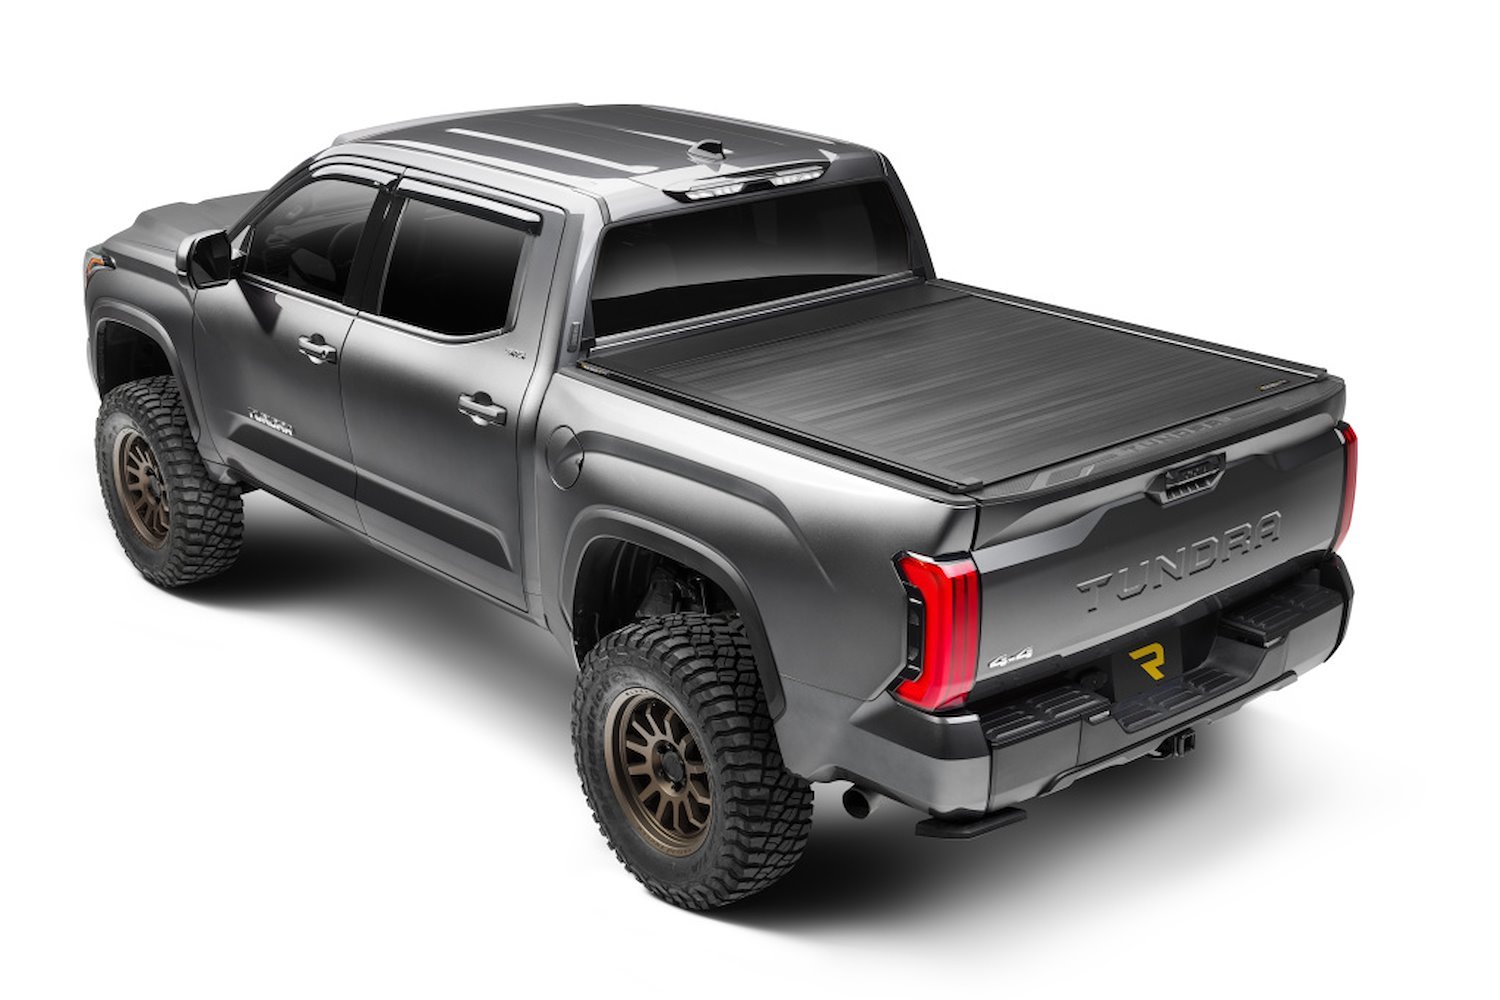 EQ0461 EQ Retractable Tonneau Cover 2014-2018 Chevy Silverado/GMC Sierra 5' 9" Bed without Stake Pockets